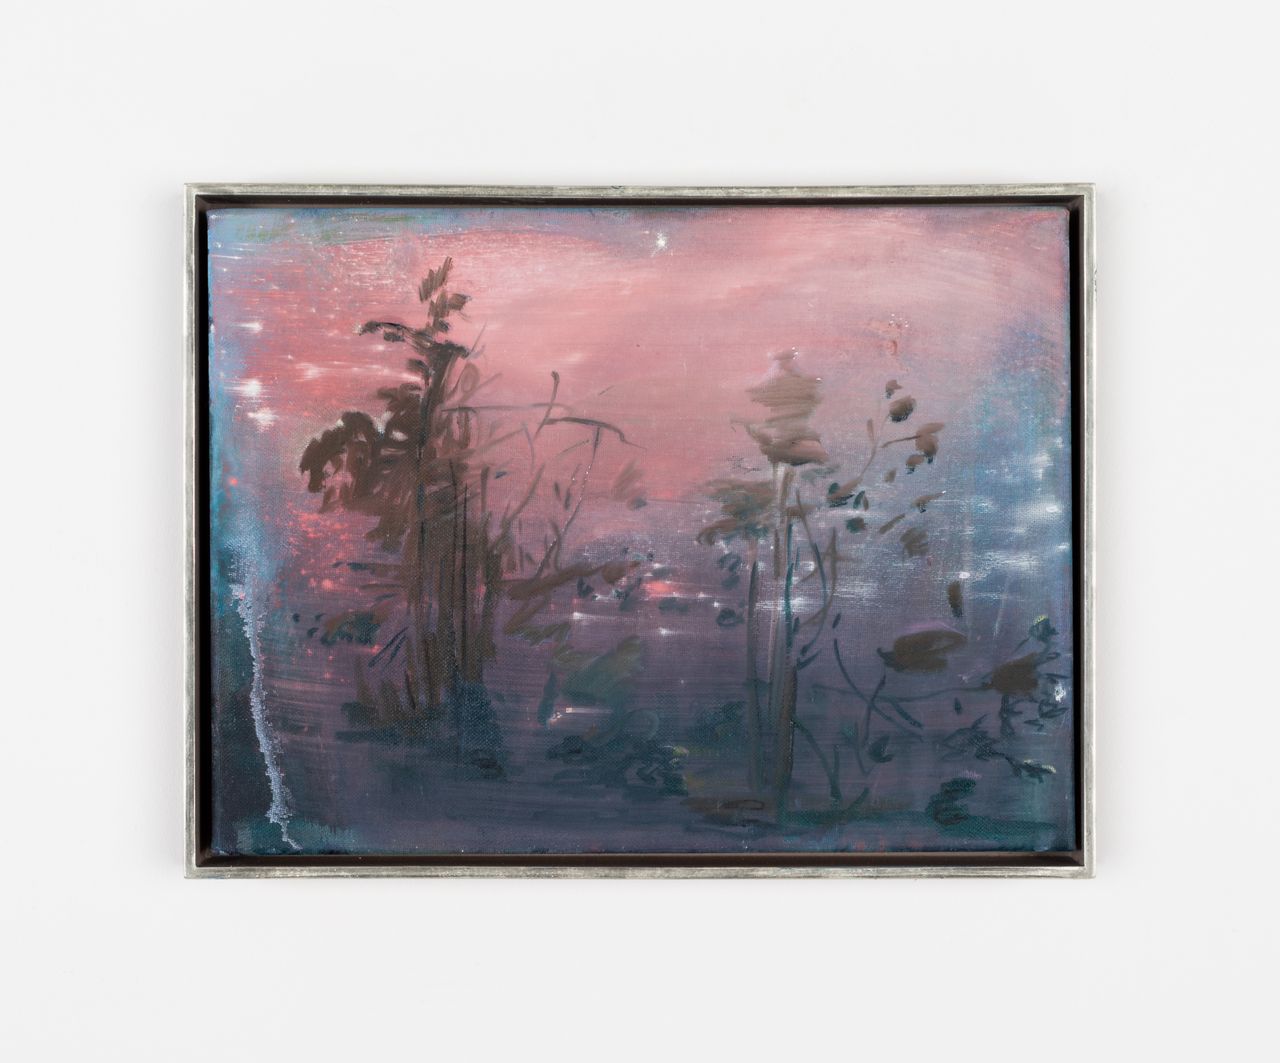 Pink Mineral, 2020 | Oil on canvas 40.39 x 30.48 cm